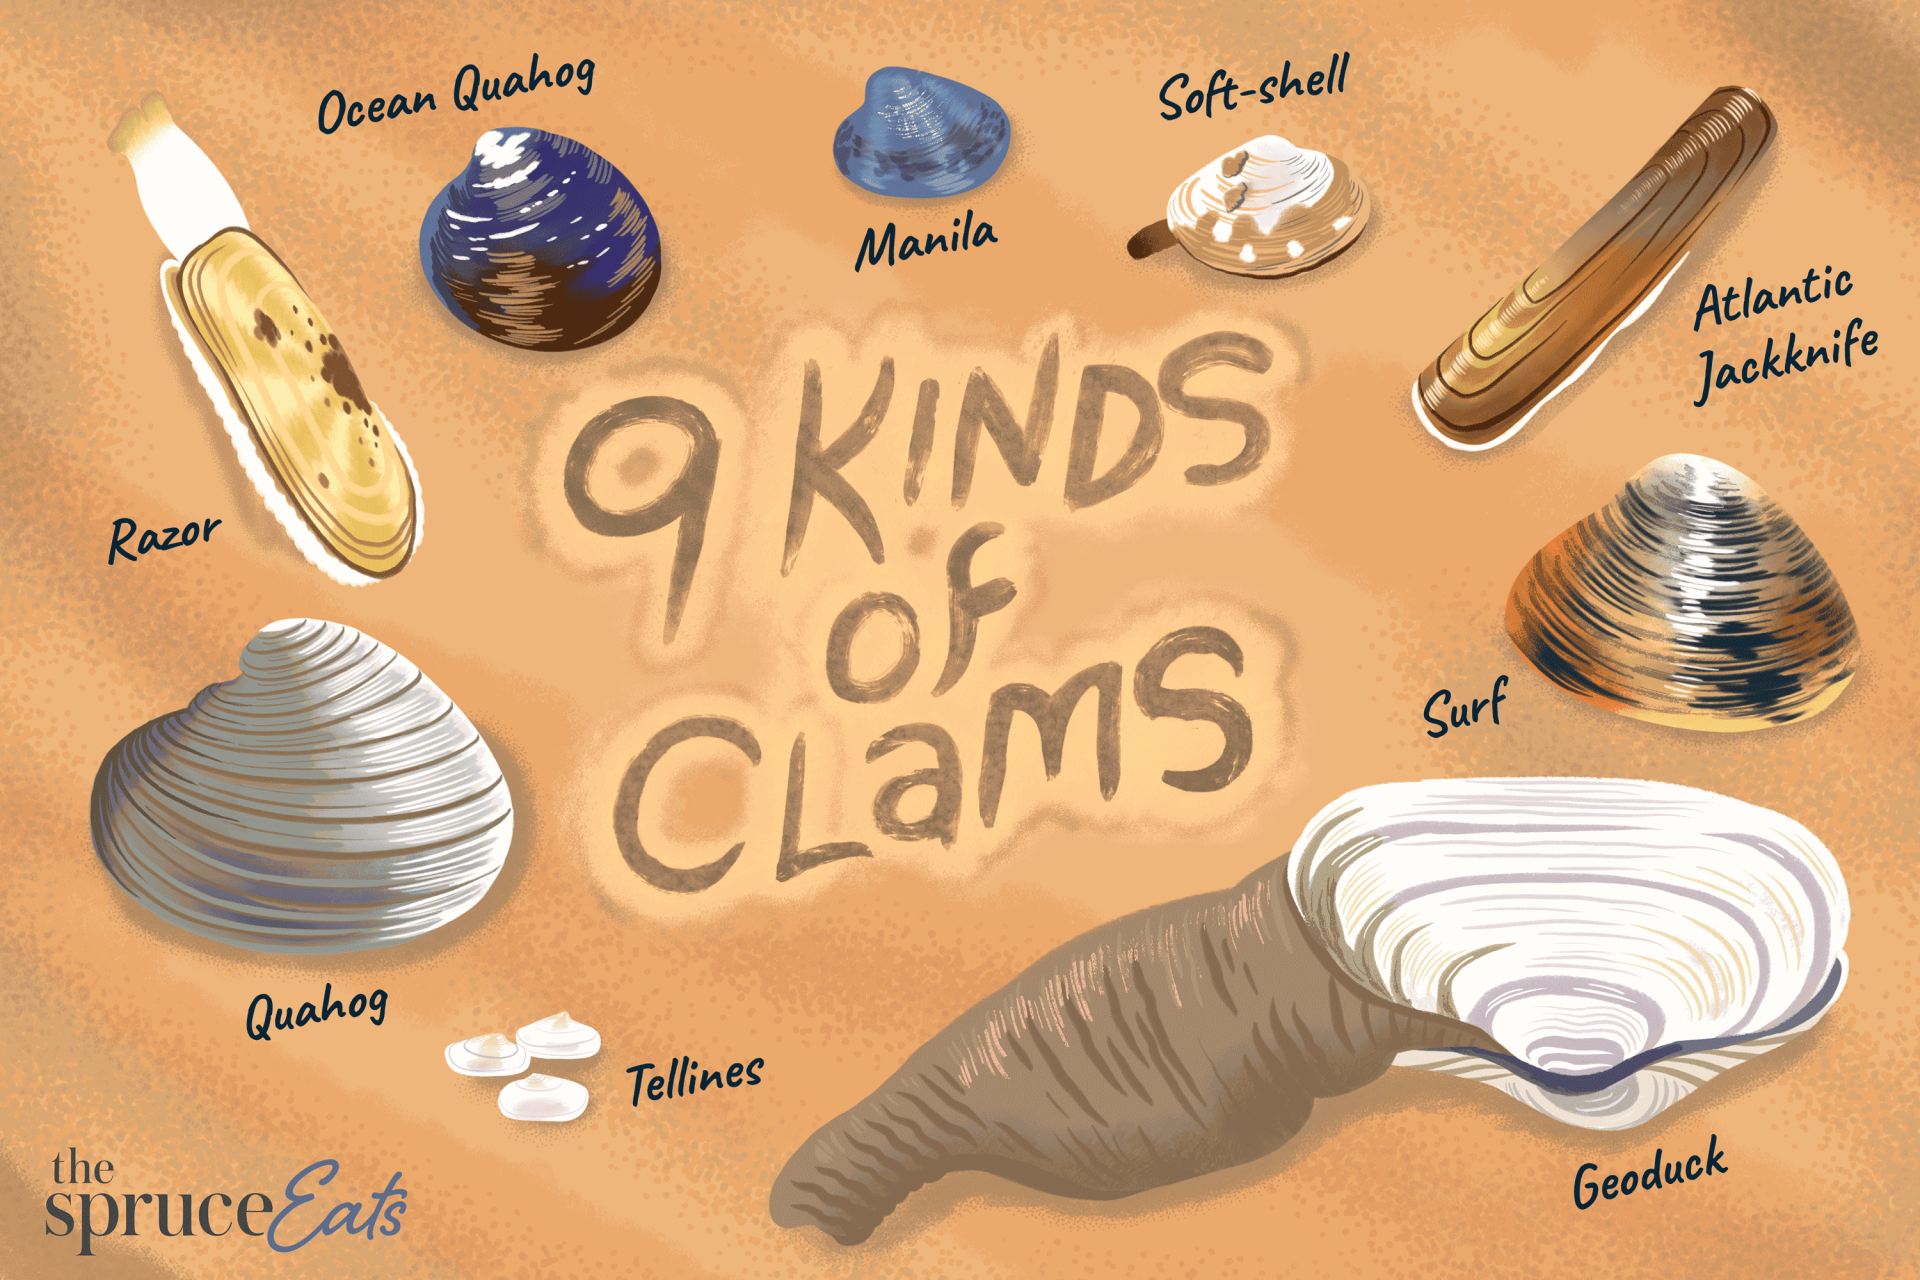 National Fried Clam Day (July 3): History, Celebrations and Facts